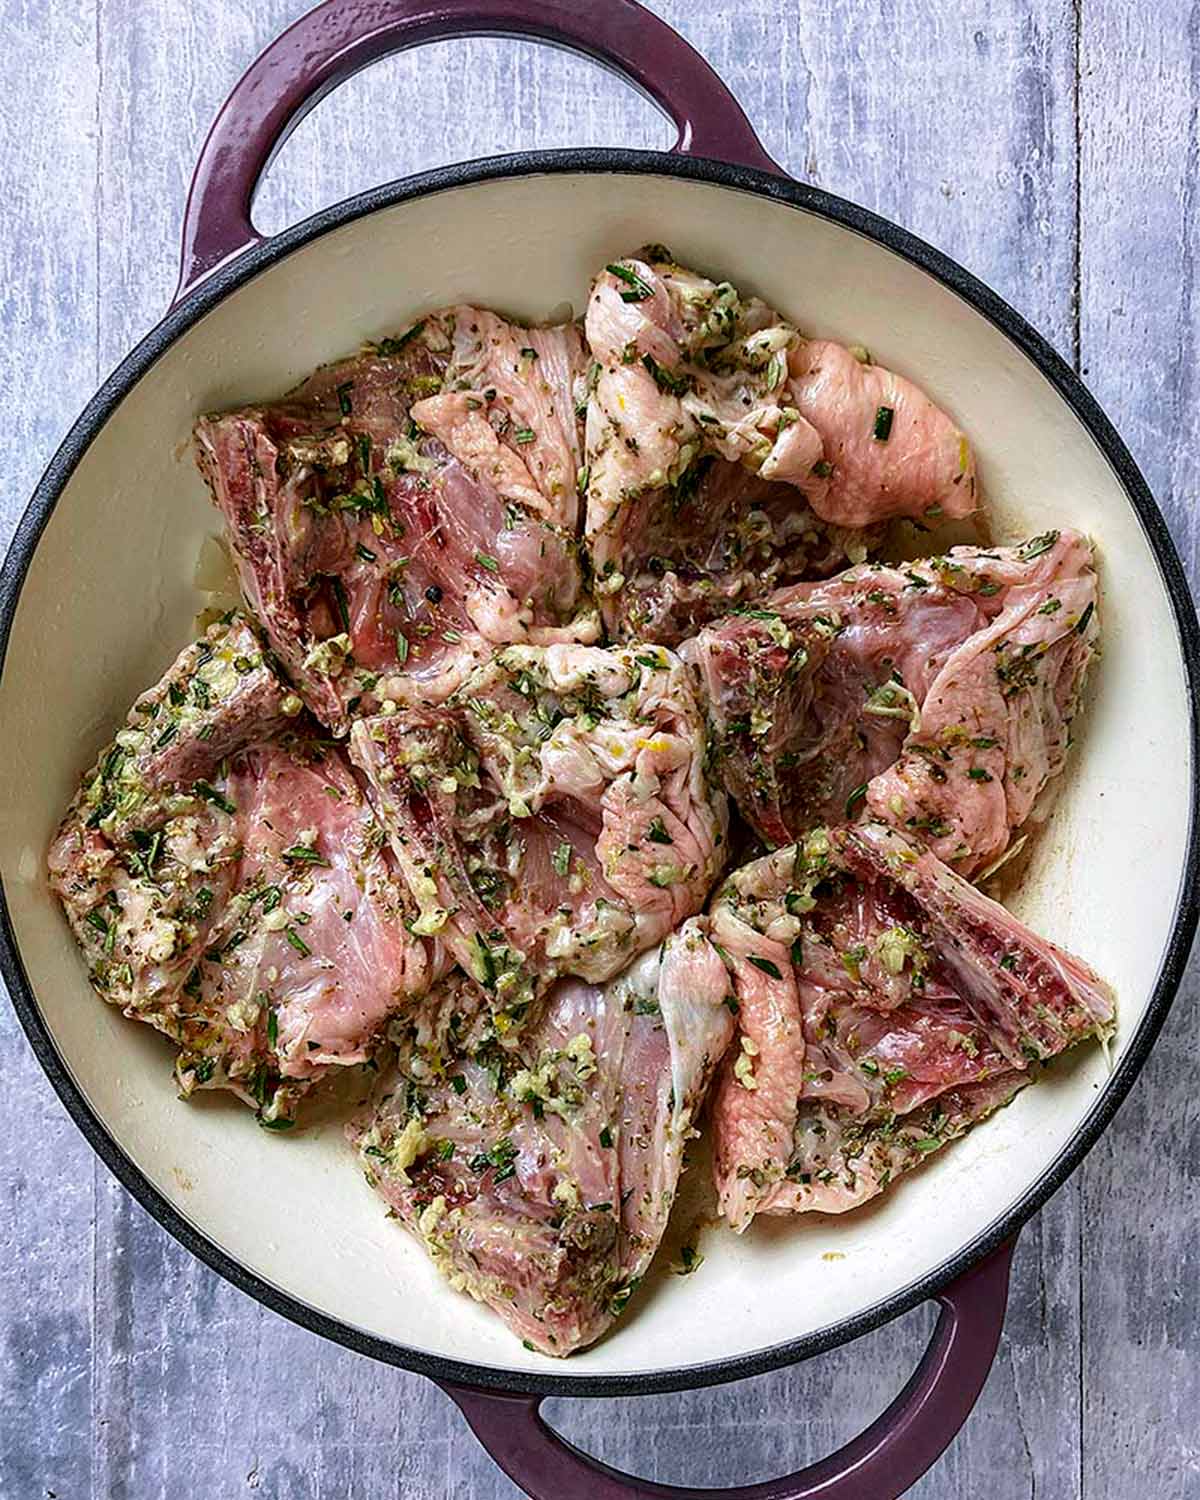 Herb covered chicken thighs in a shallow baking dish.